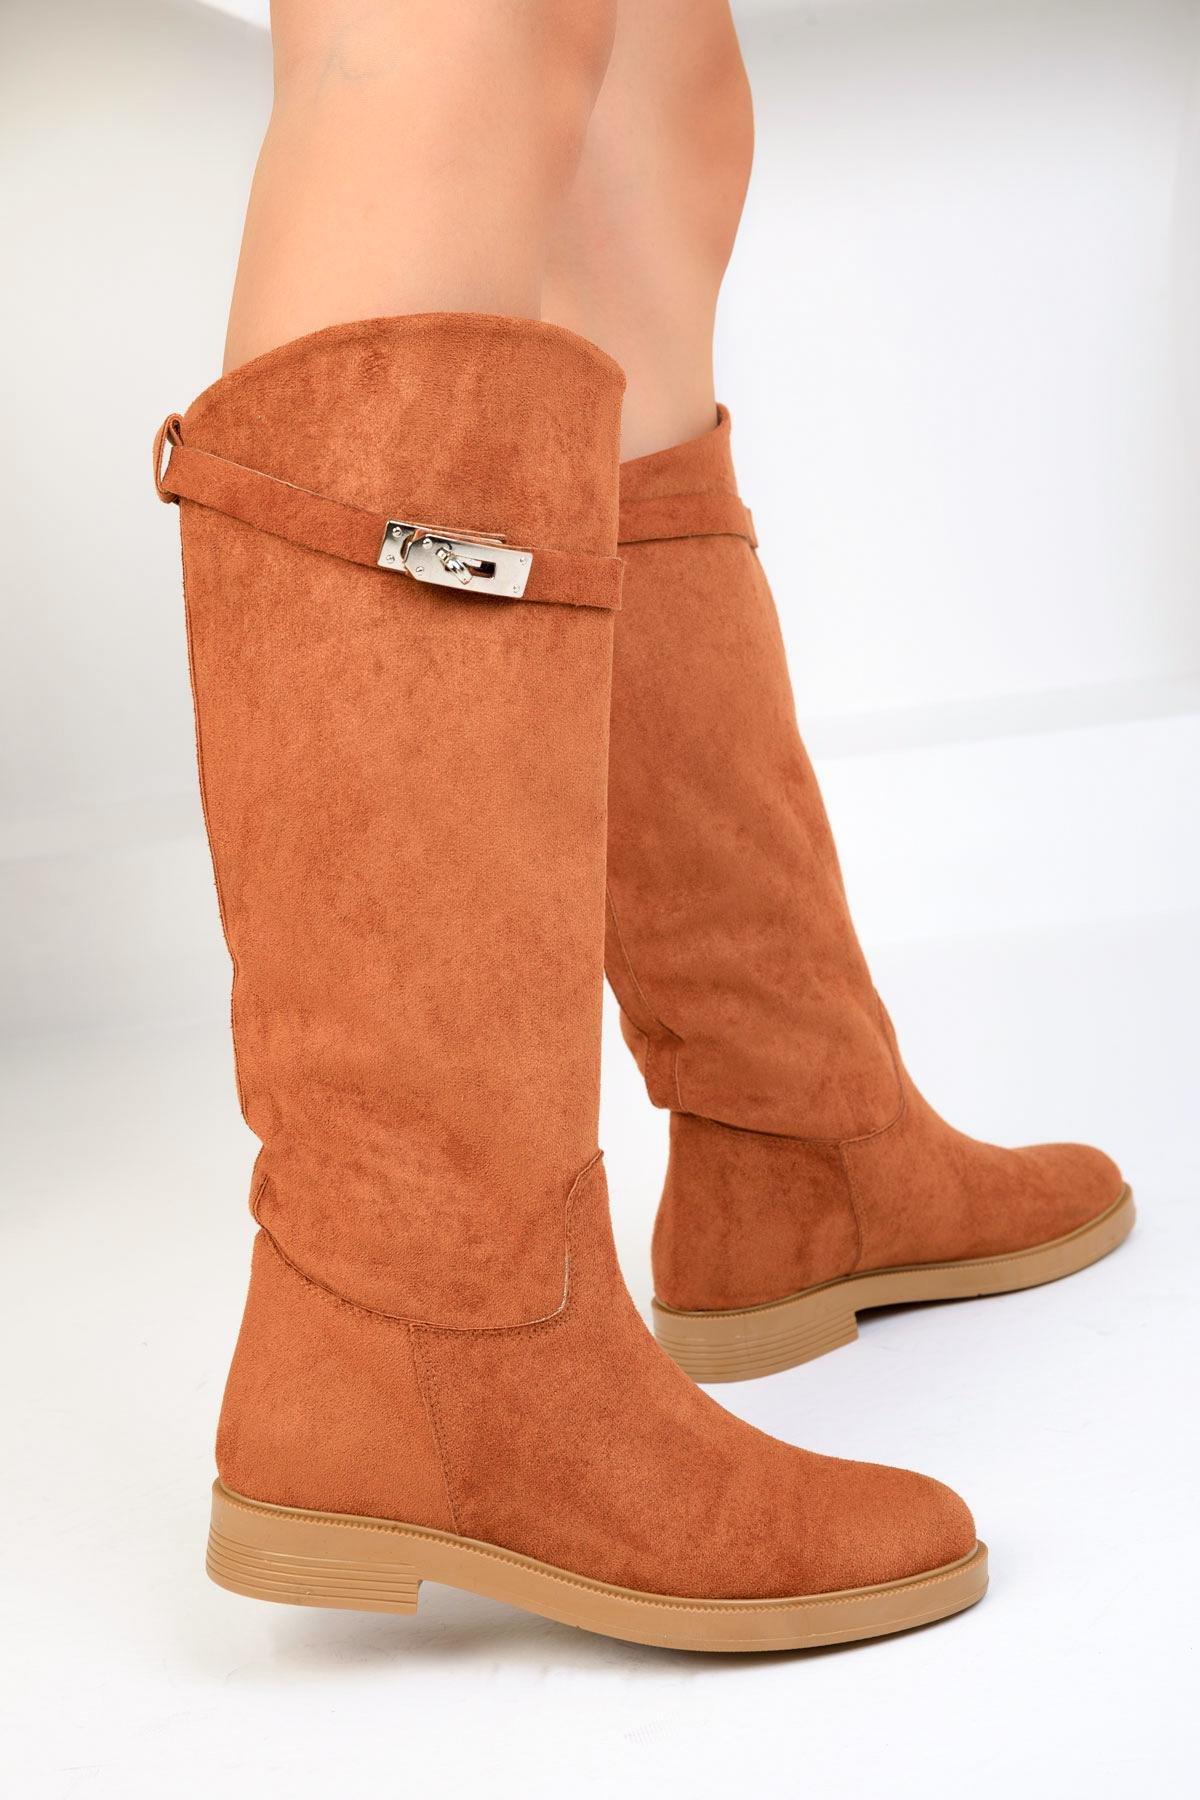 SOHO - brown Suede Knee High Flat Boots